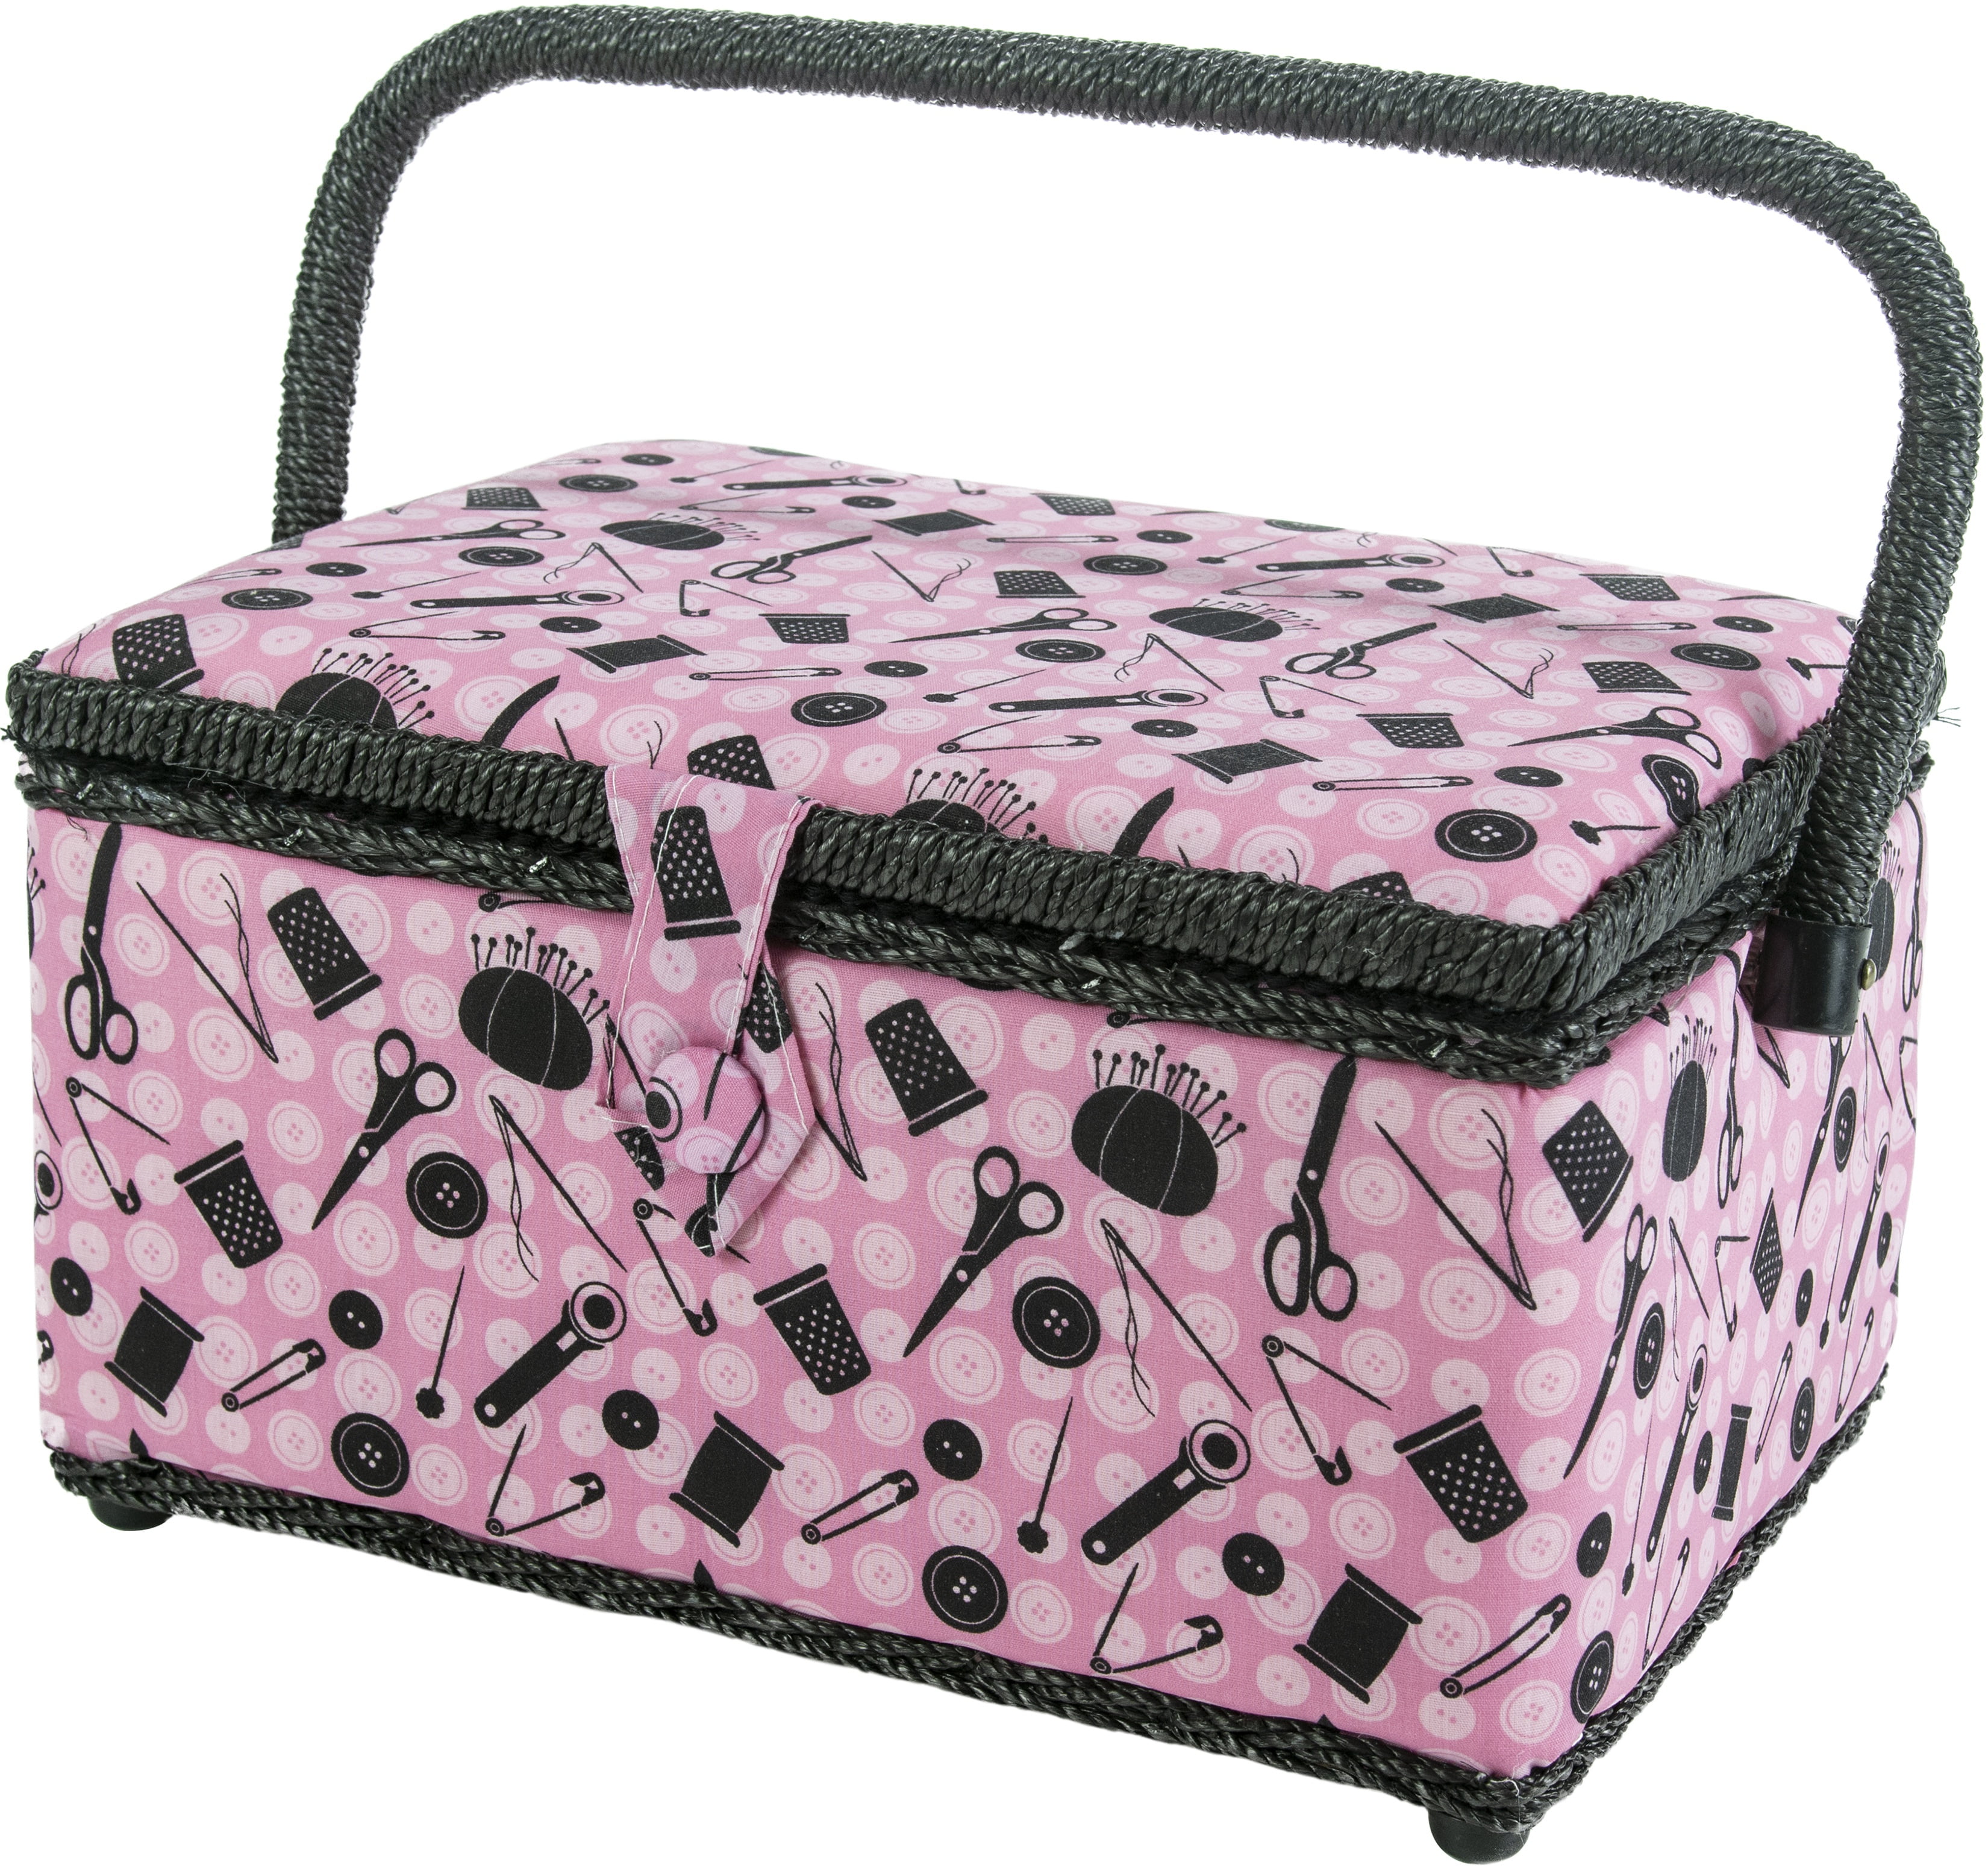 Singer 14 x 10 Sew Acessories Sewing Basket - Sewing Baskets & Pin Cushions - Sewing Supplies